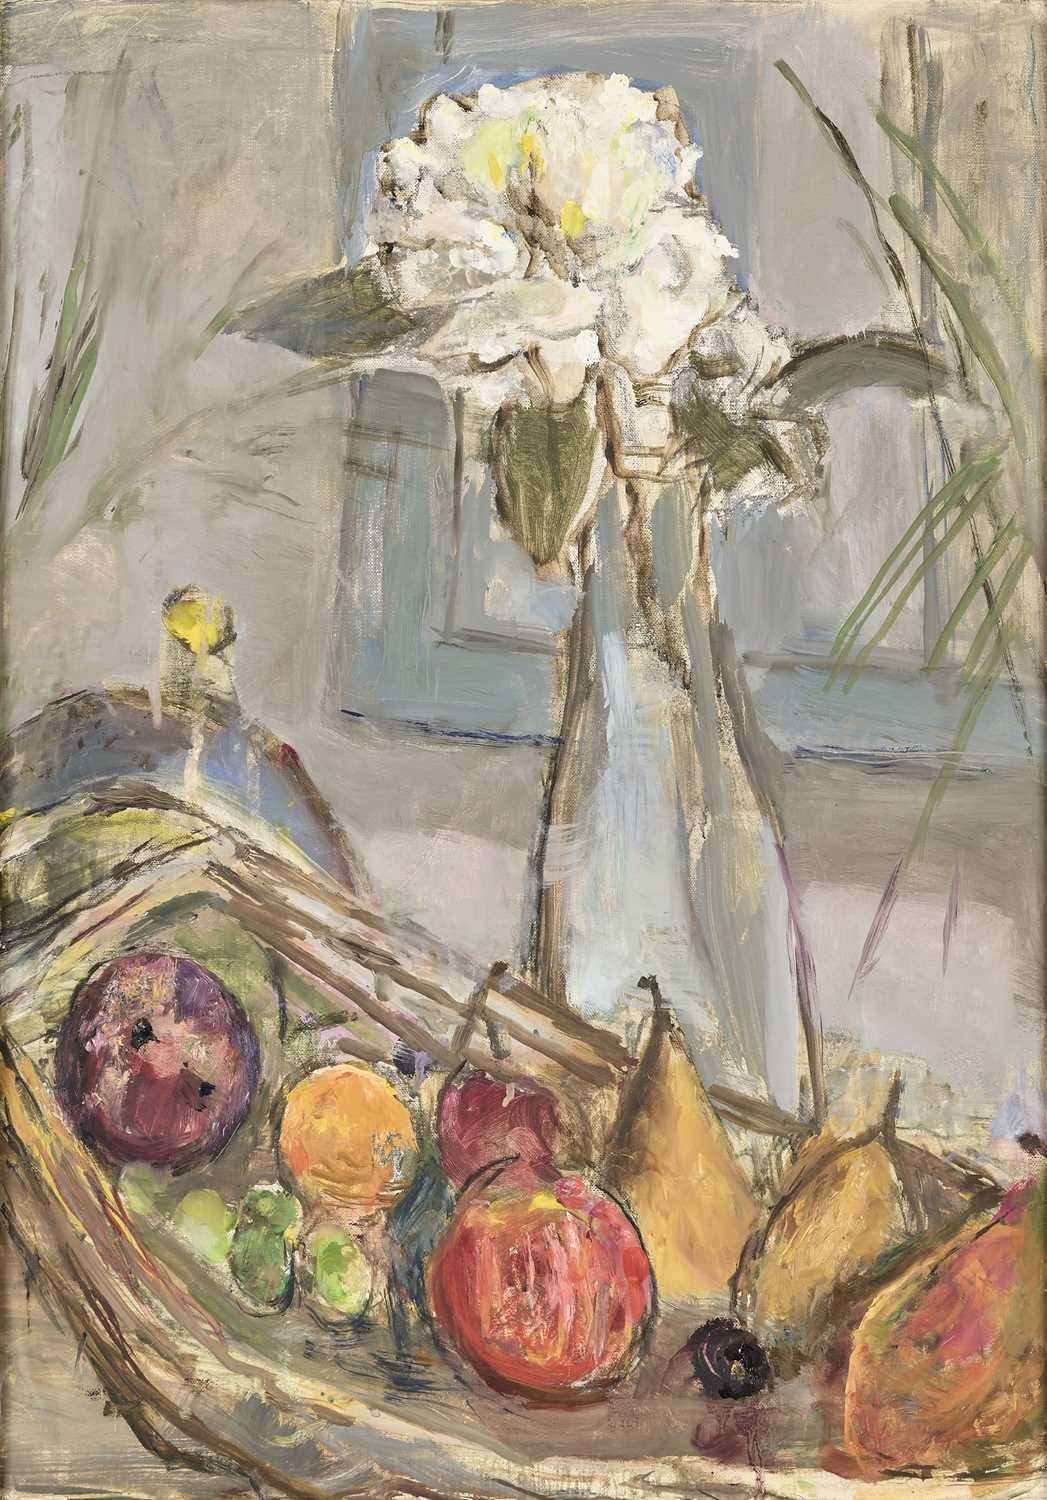 FRUIT AND ROSE by Marie-Louise von Motesiczky, Painted in 1991